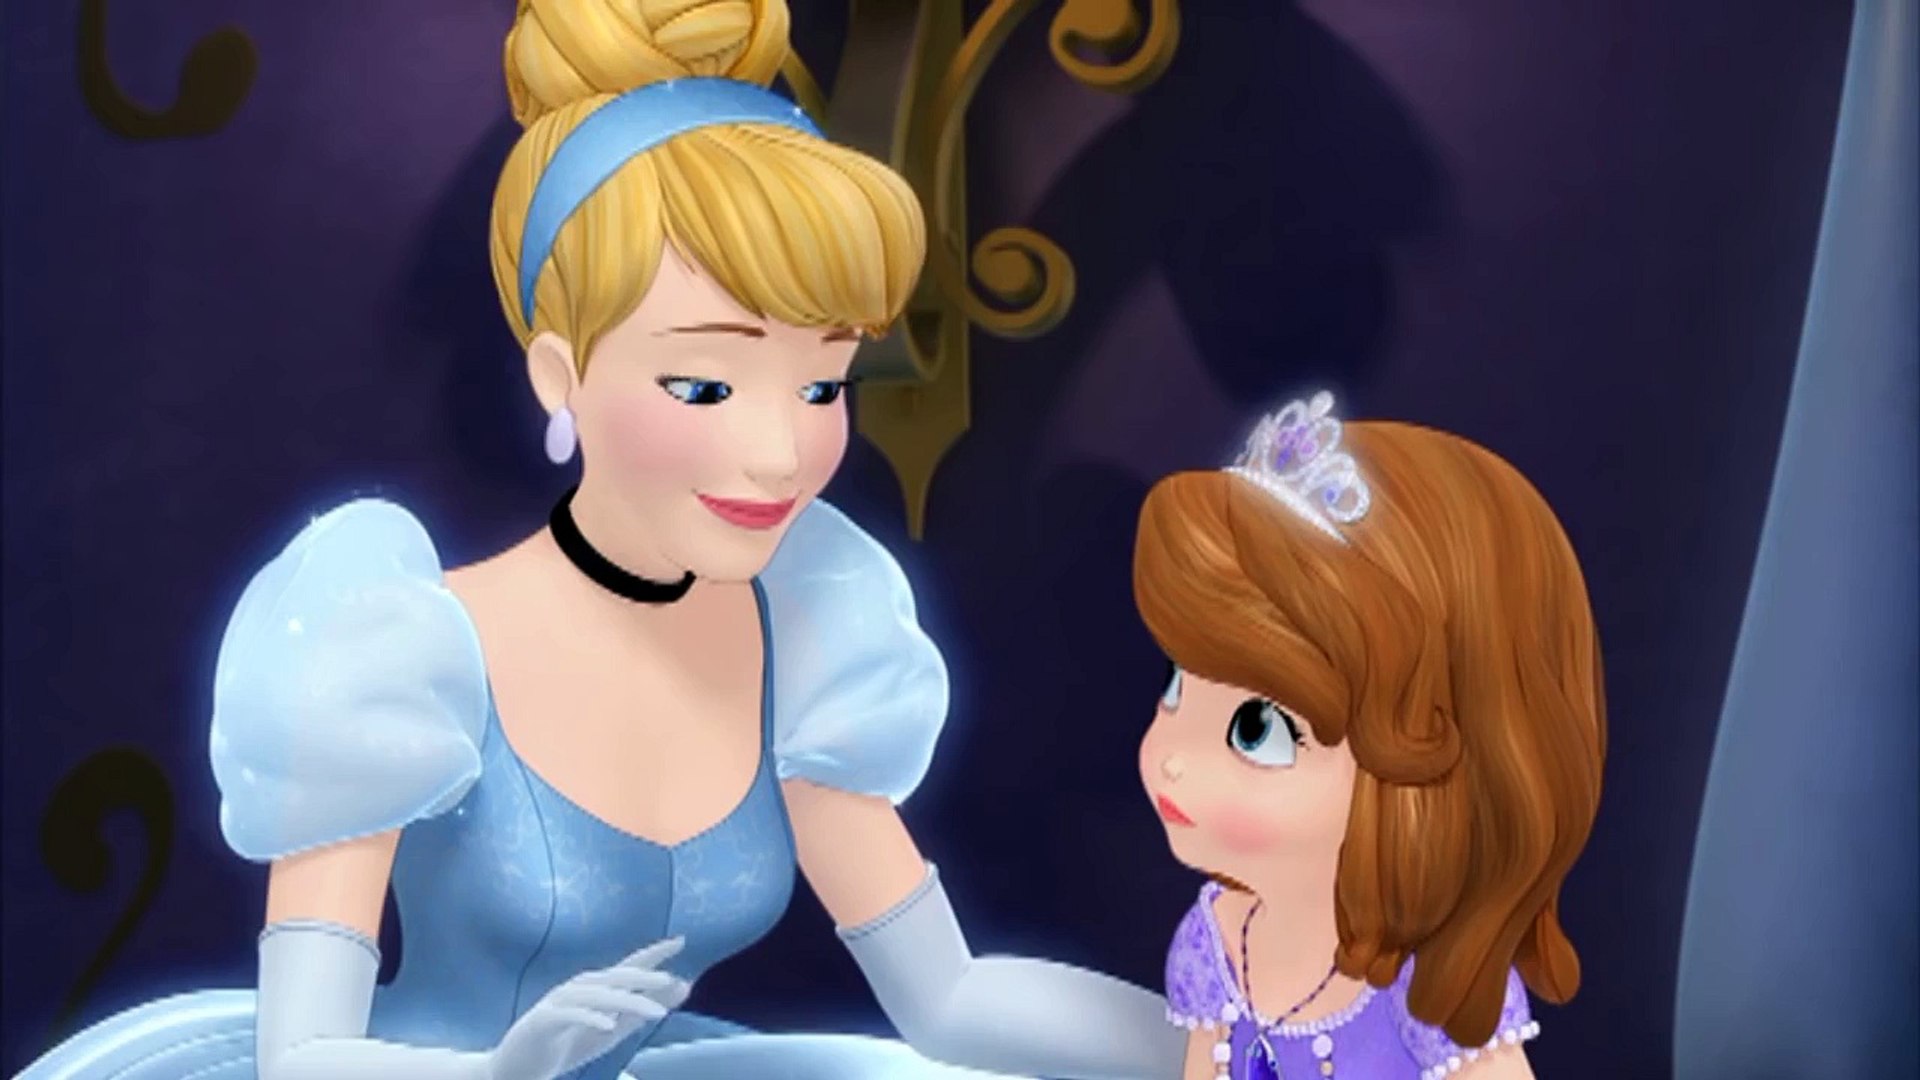 Sofia The First Japanese ちいさなプリンセス ソフィア 日本語 Dailymotion Video